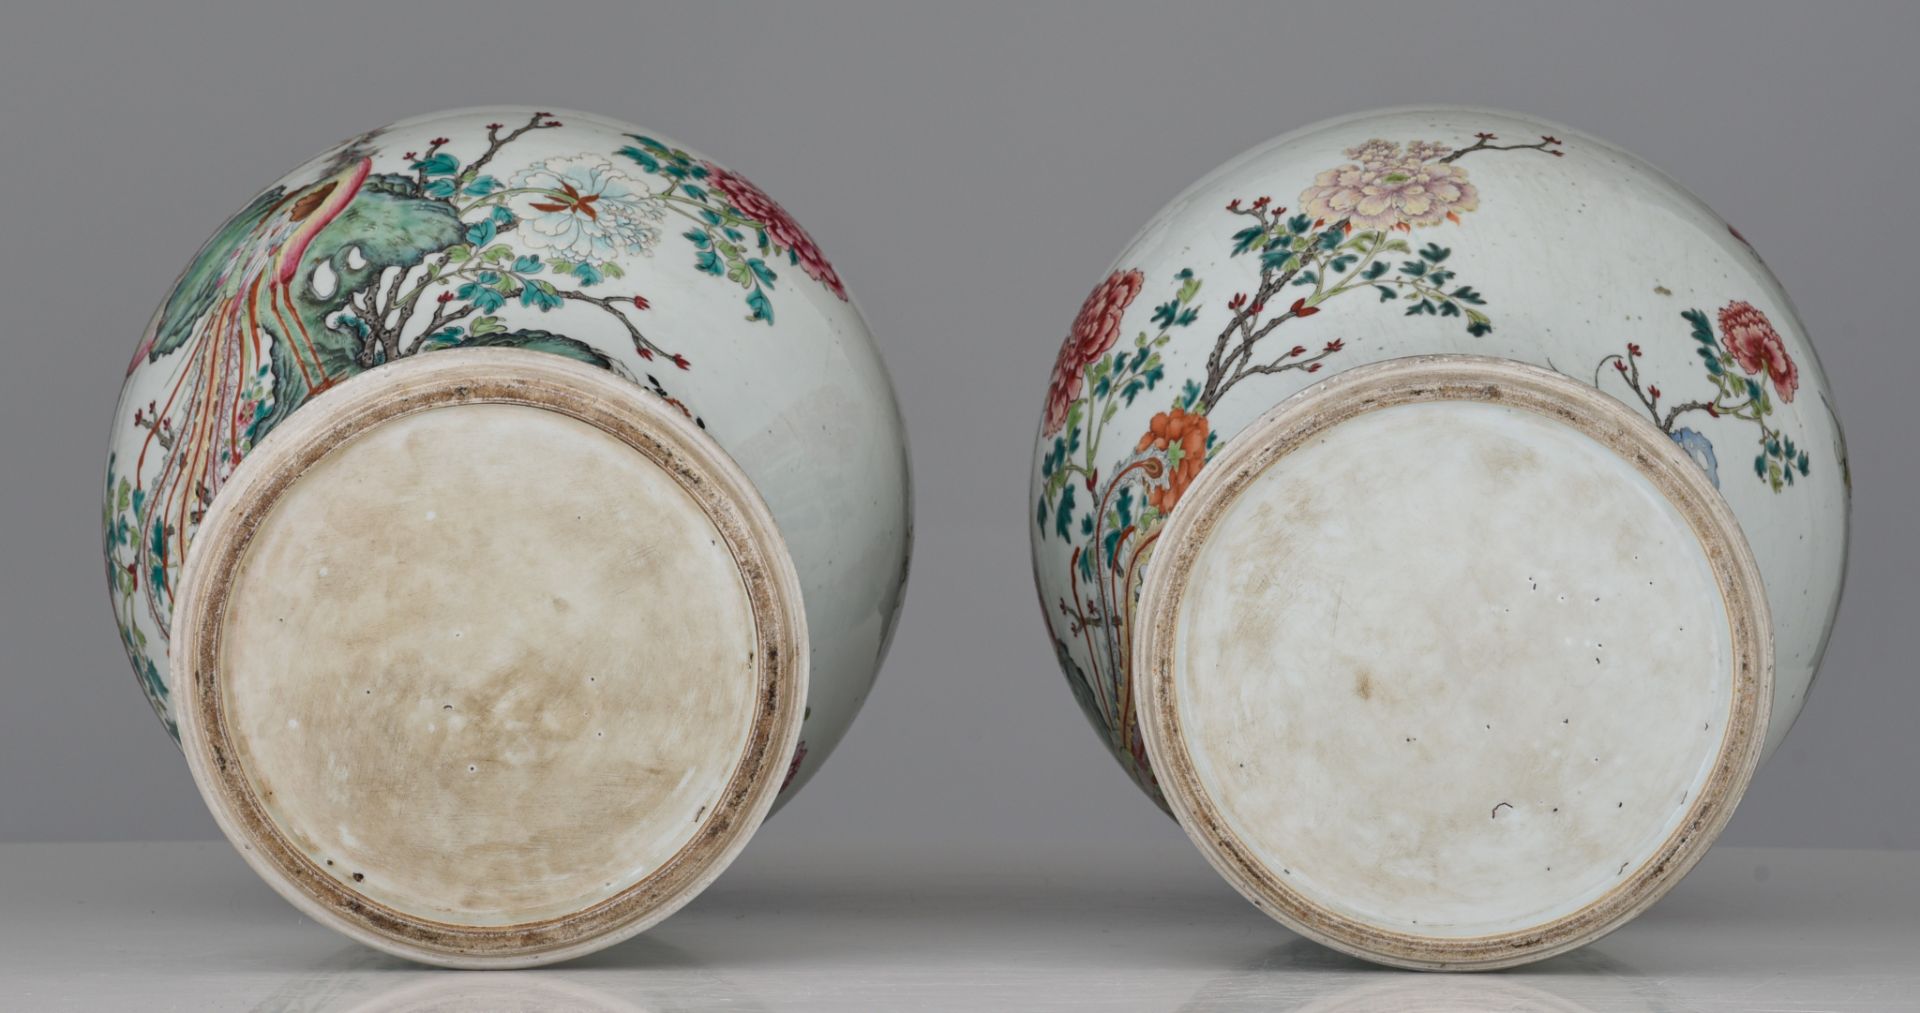 A fine pair of Chinese famille rose 'Phoenix' covered vases, 19thC, H 44,5 cm - Image 7 of 7